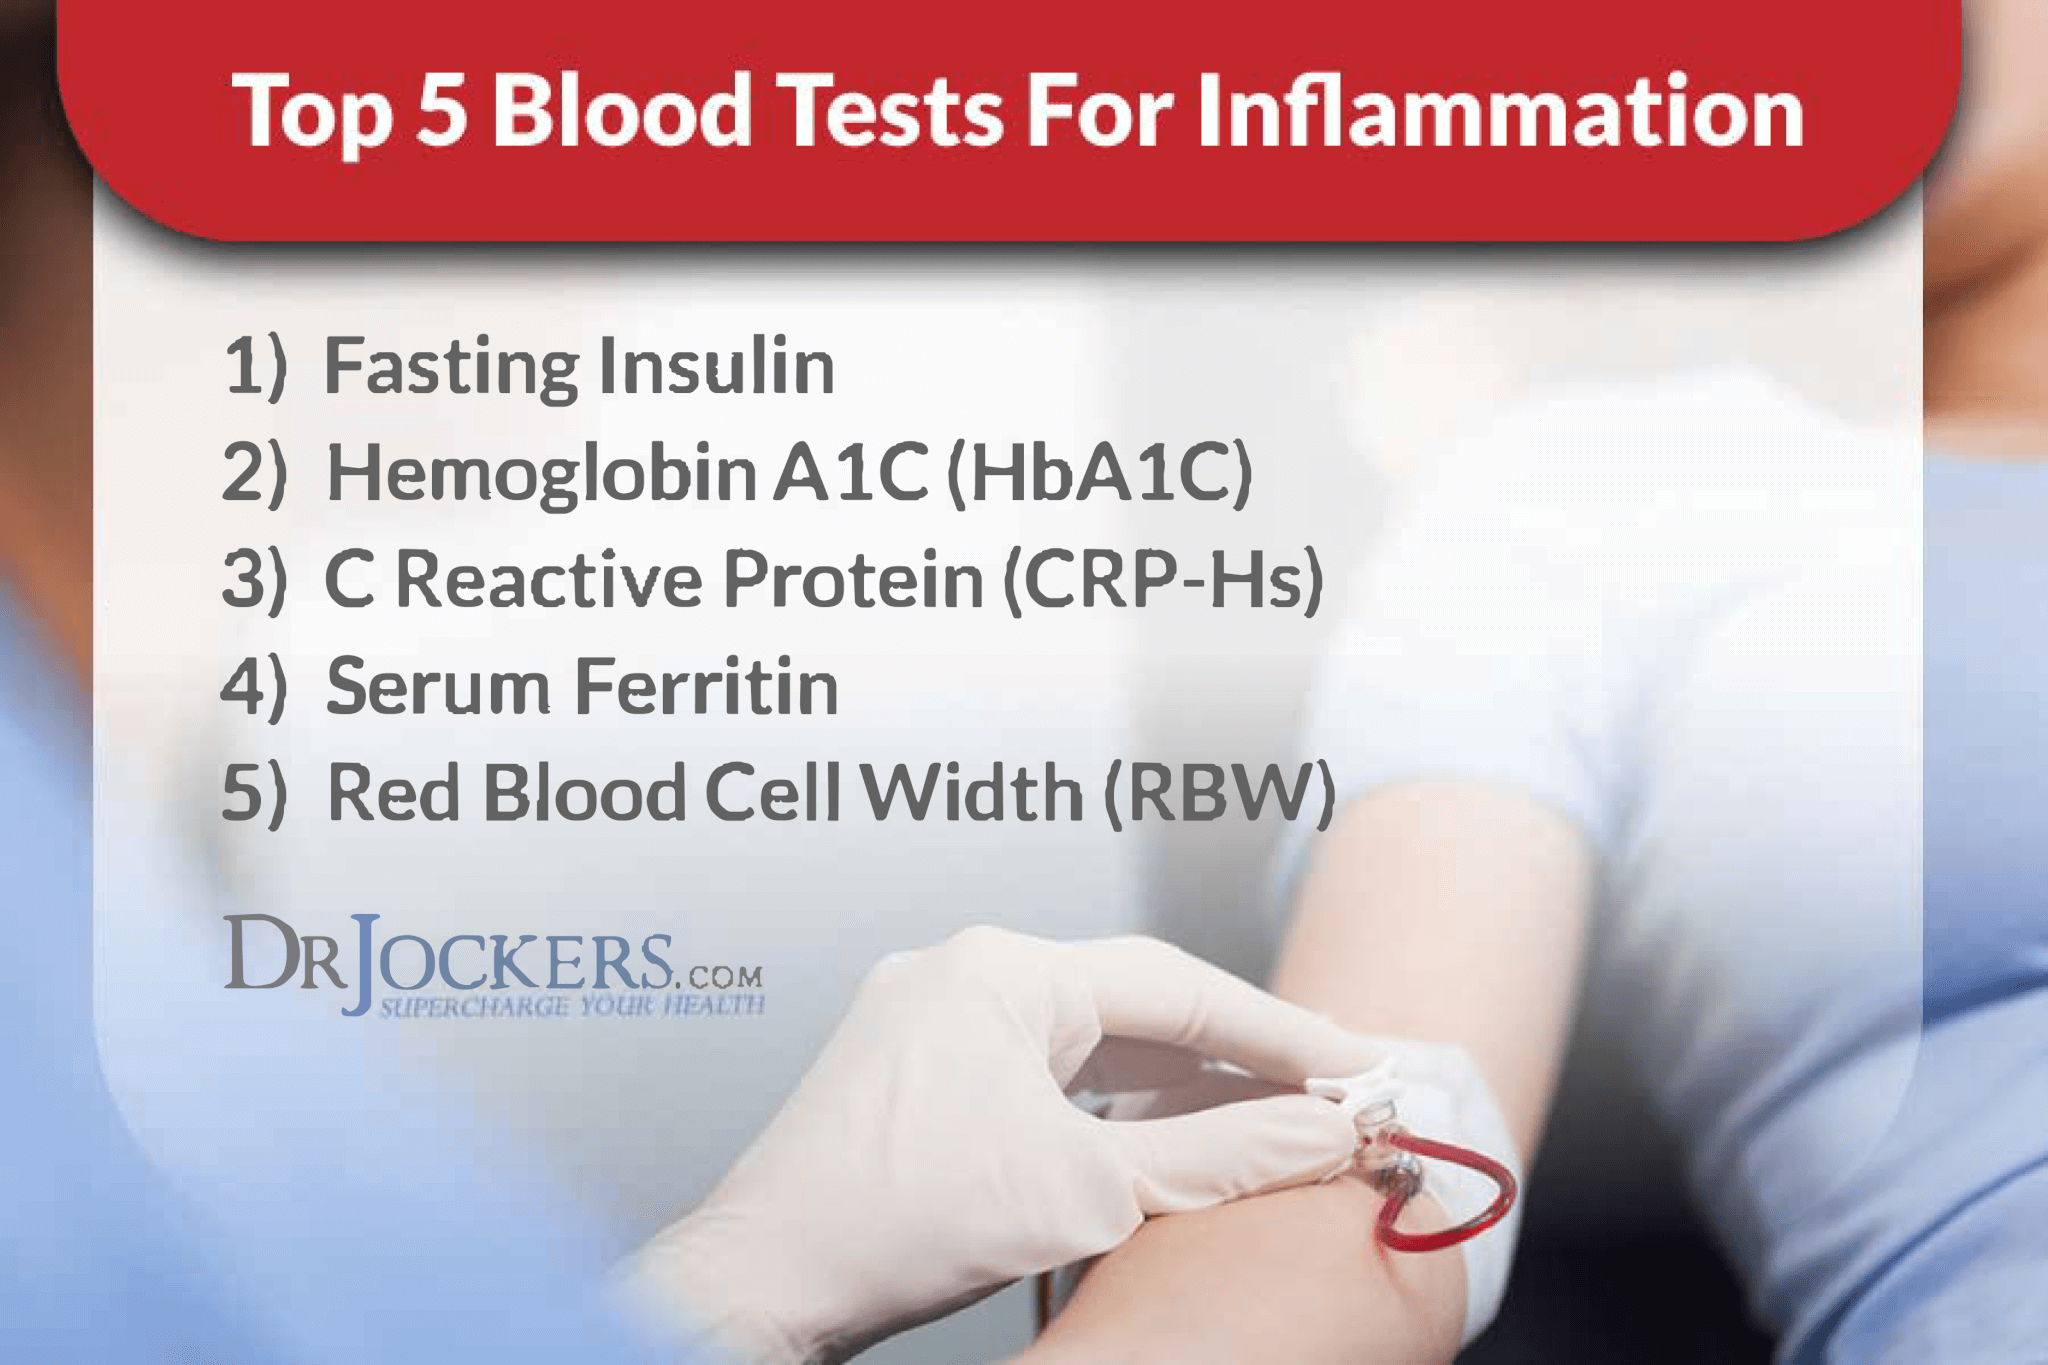 tests, Top 5 Blood Tests For Inflammation